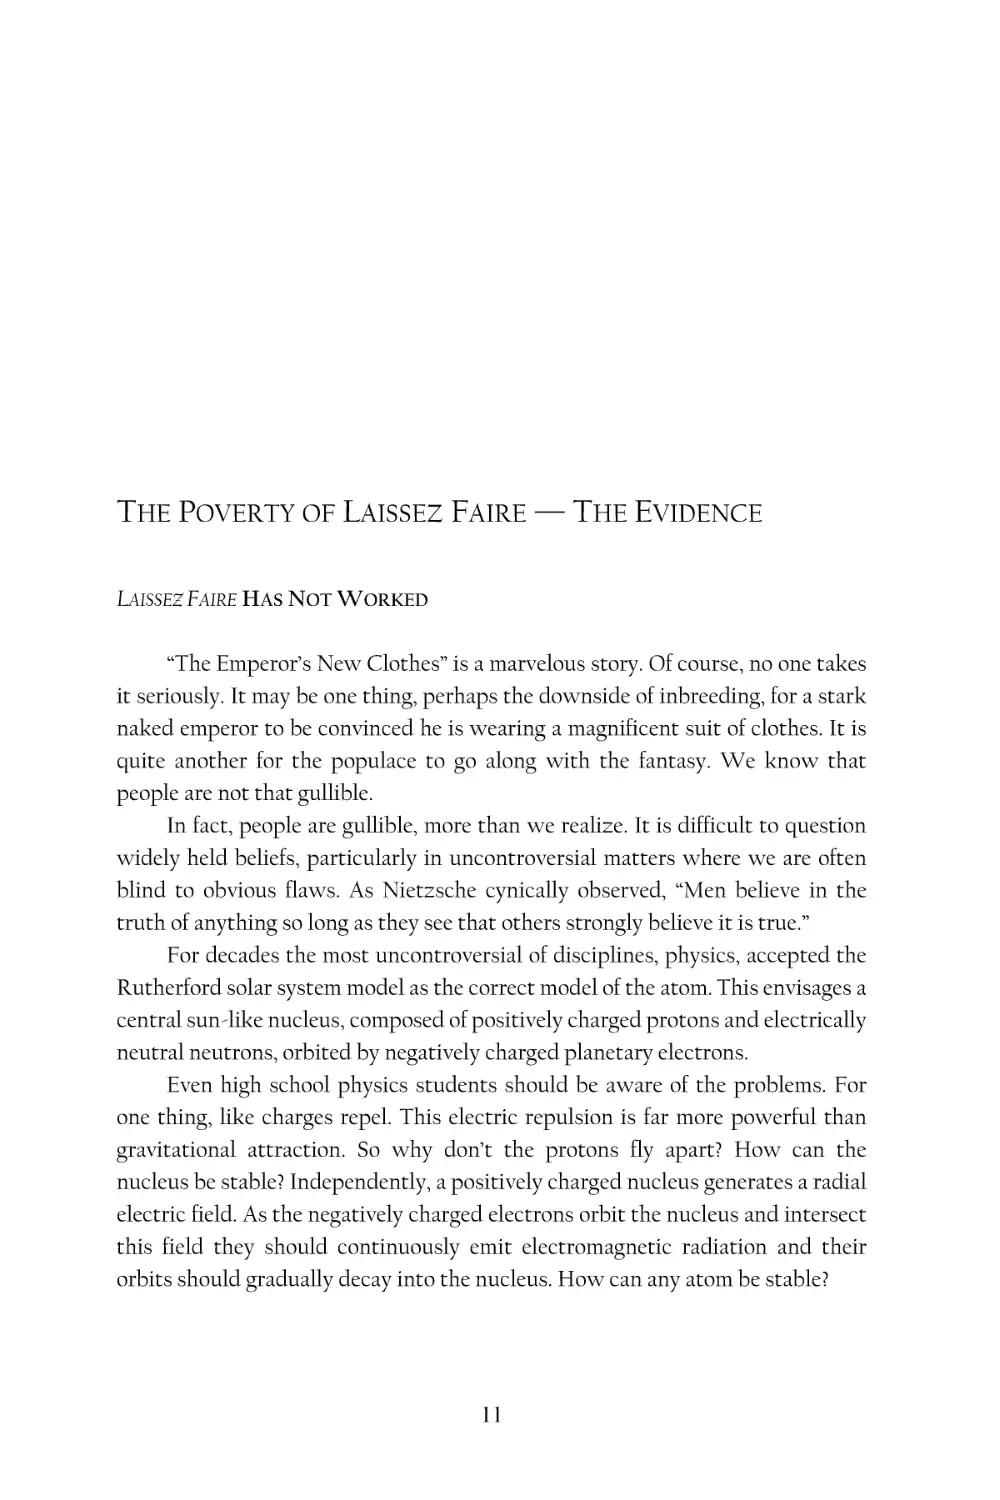 The Poverty of Laissez Faire - The Evidence
Laissez Faire Has Not Worked